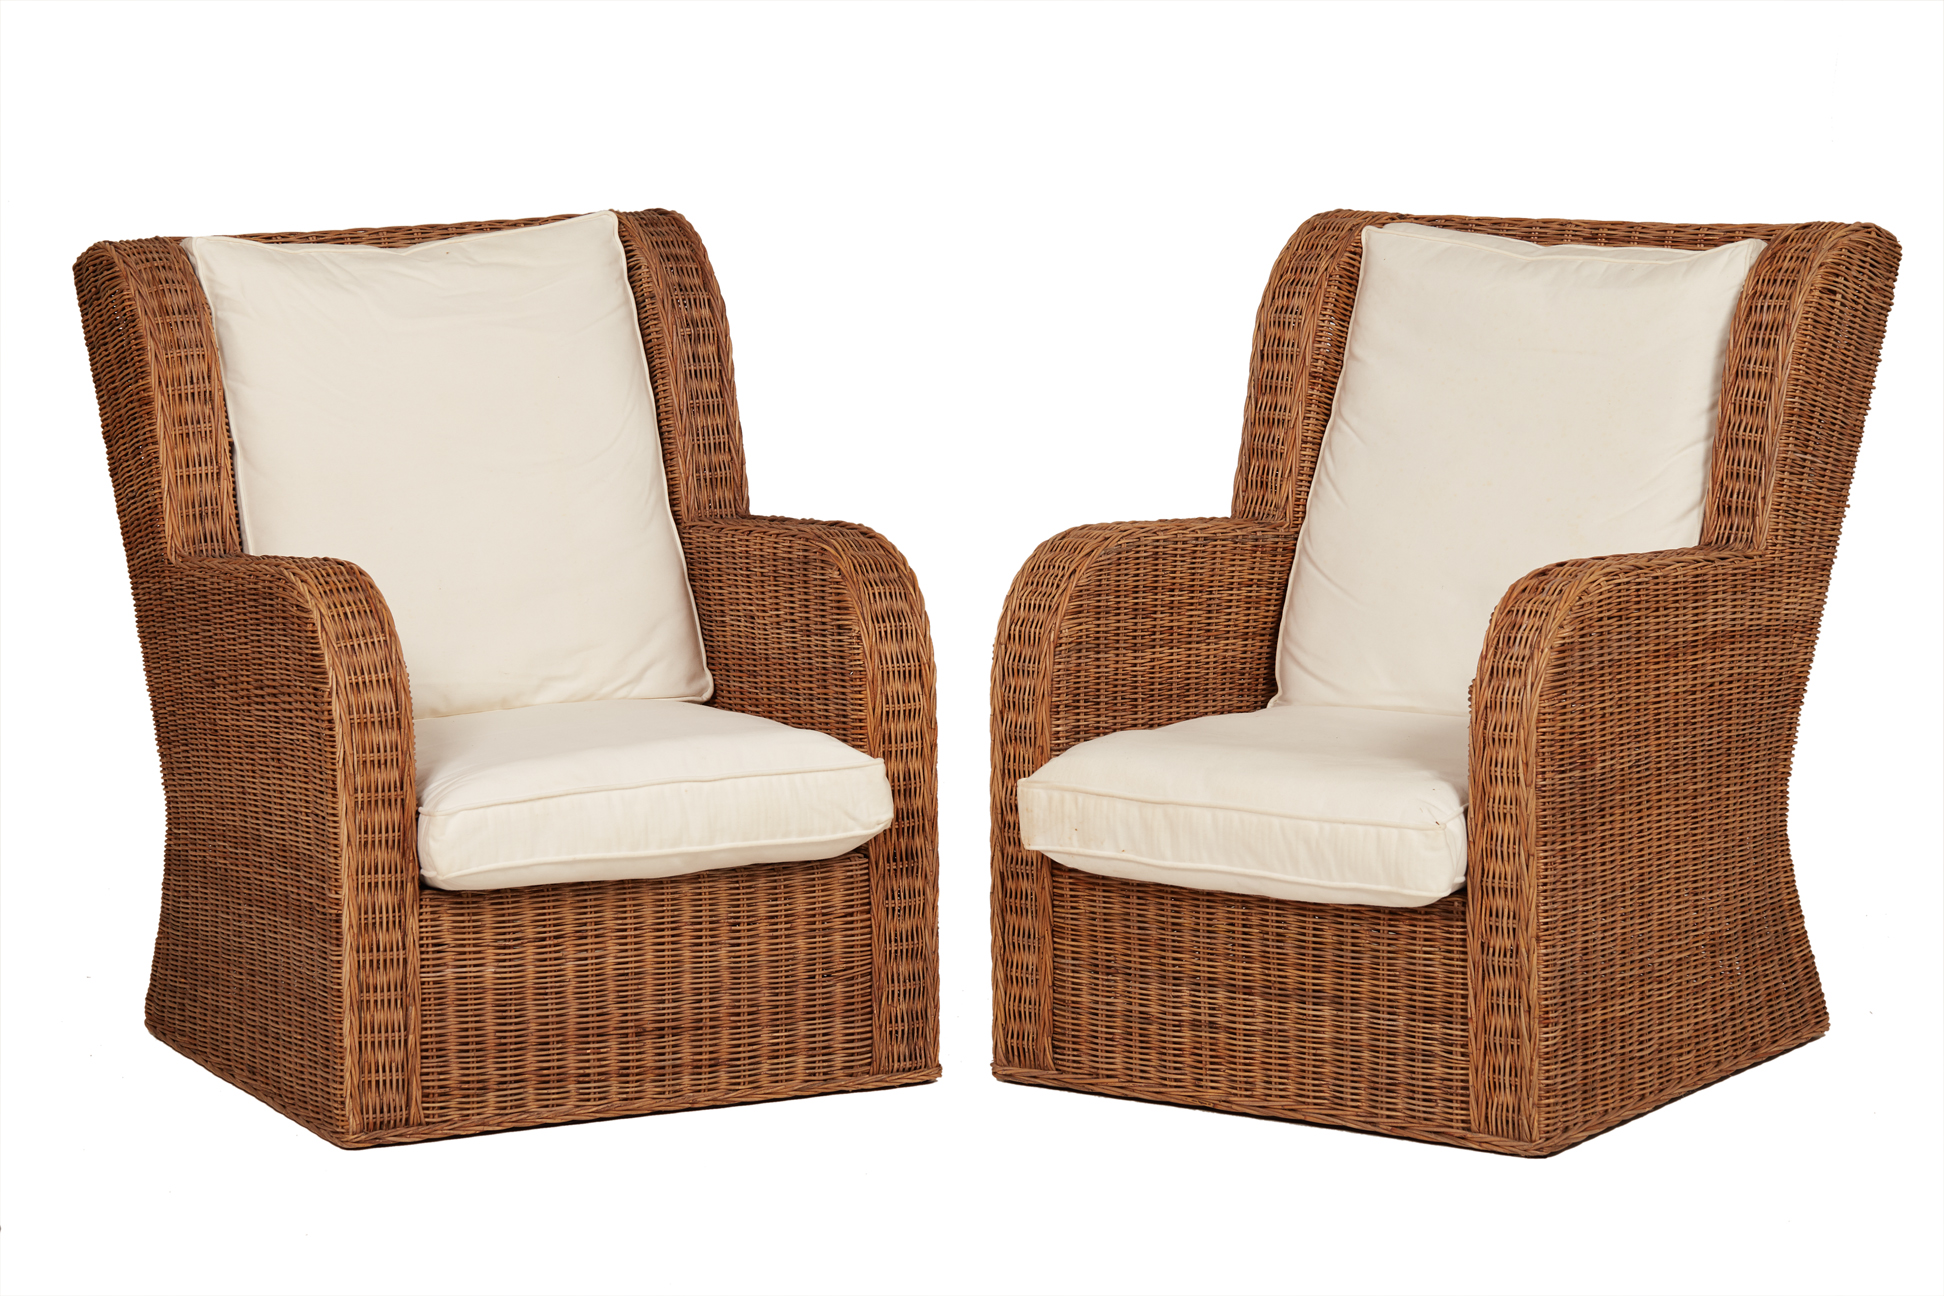 A PAIR OF ELEMENTS WICKER ARMCHAIRS